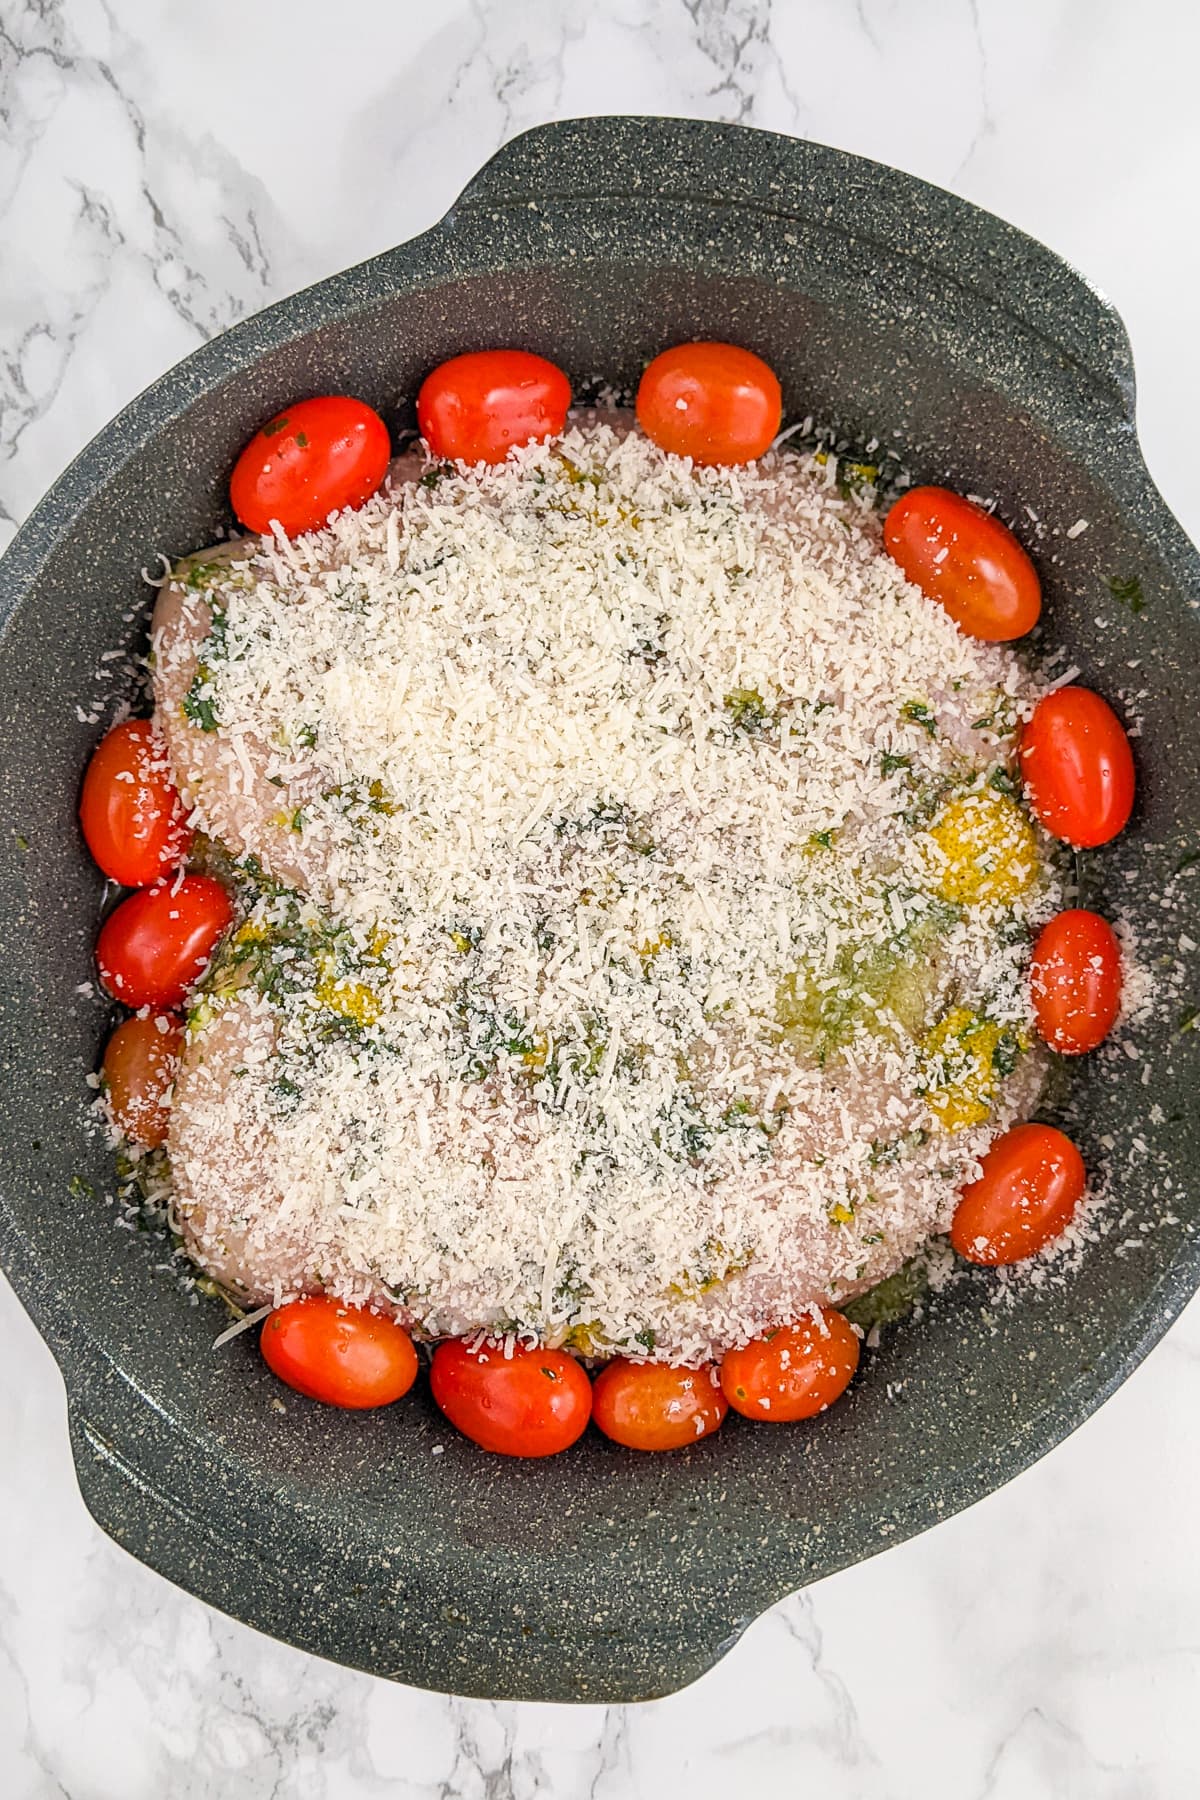 Top view of chicken breast in a casserole with tomatoes and topped with parmesan.